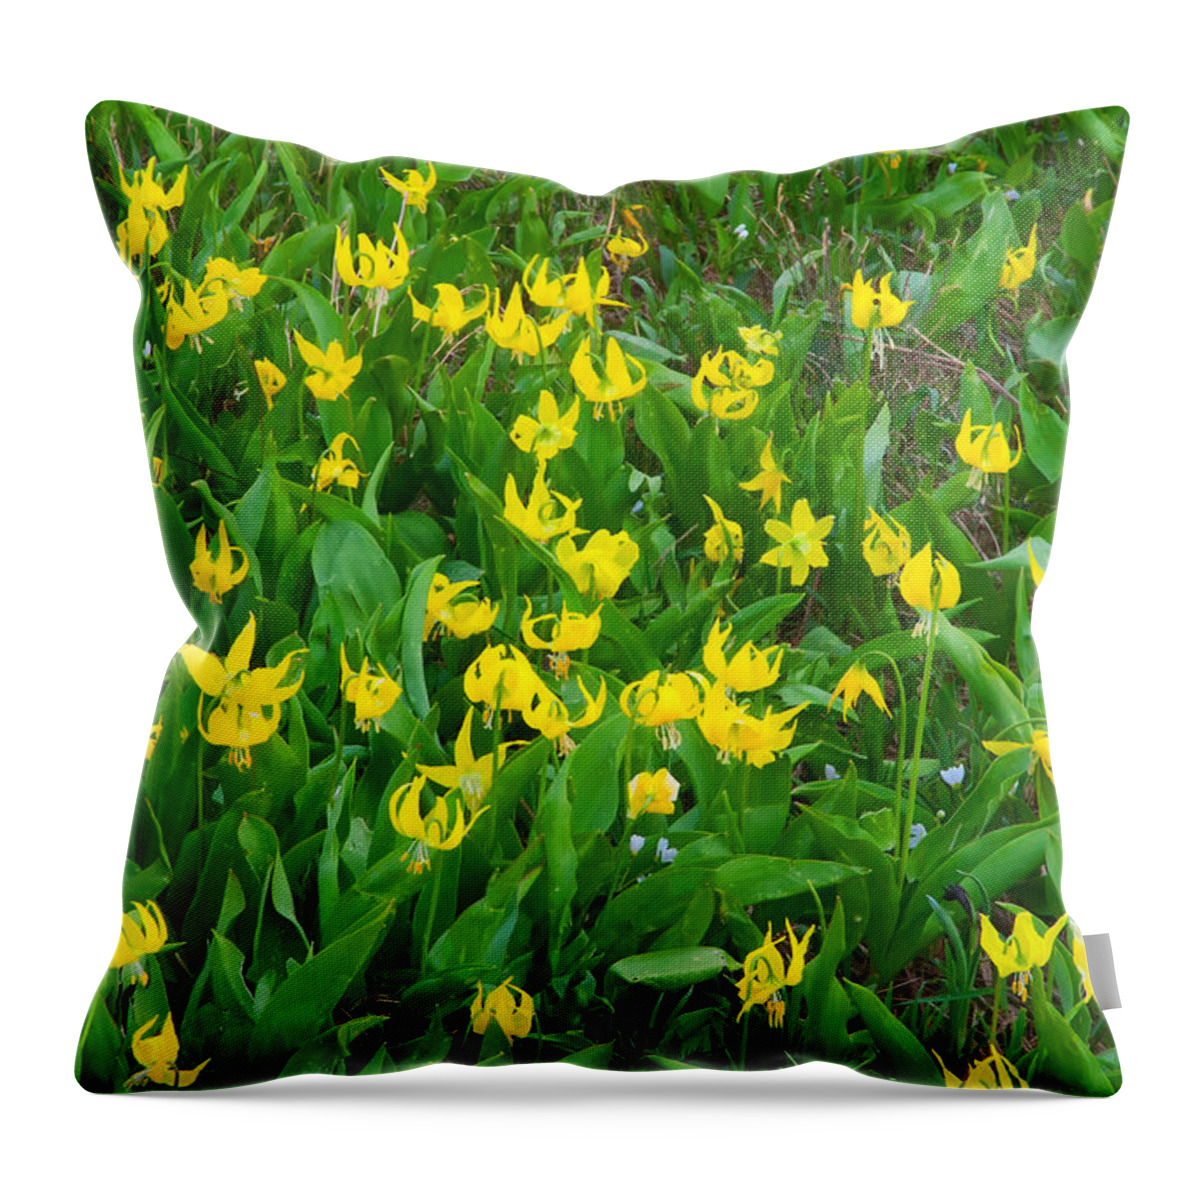 Glacier Lilly Throw Pillow featuring the photograph Glacier Lilly Wildflower Meadow - Glacier National Park by Ram Vasudev